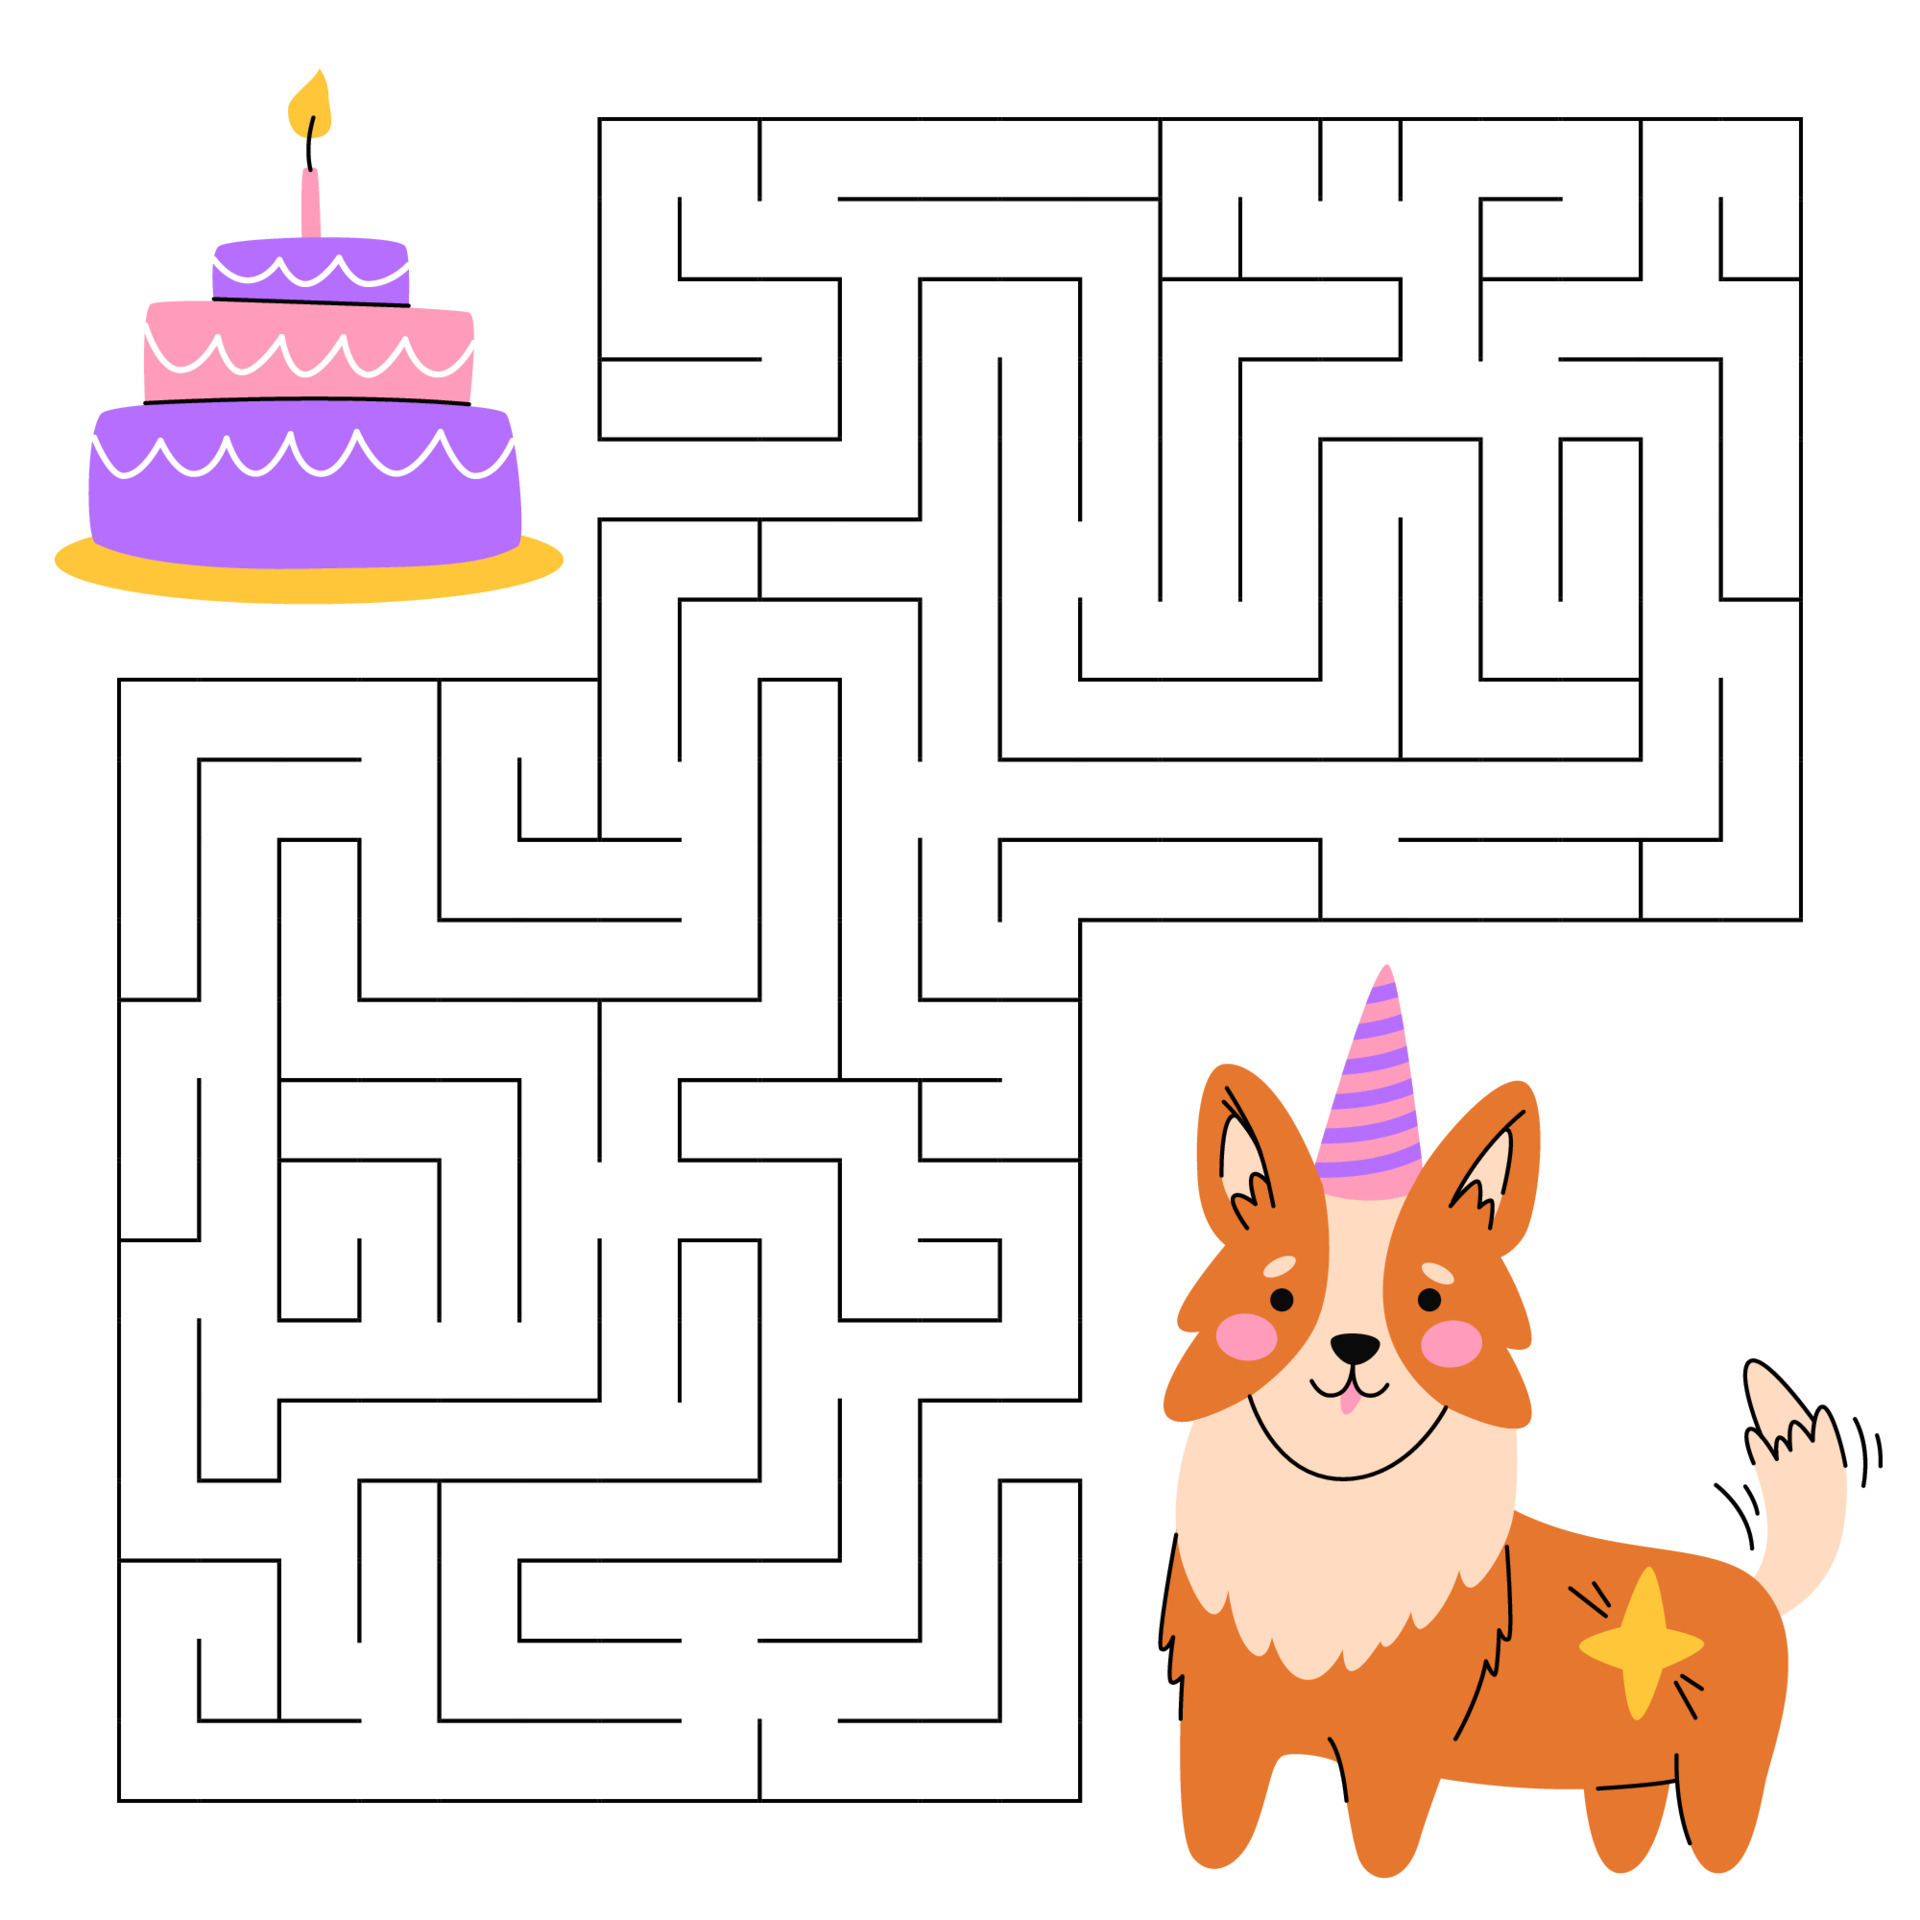 https://static.vecteezy.com/system/resources/previews/020/824/050/original/maze-game-for-kids-cute-corgi-looking-for-a-way-to-the-cake-happy-little-puppy-kawaii-dog-printable-worksheet-cartoon-illustration-for-birthday-vector.jpg